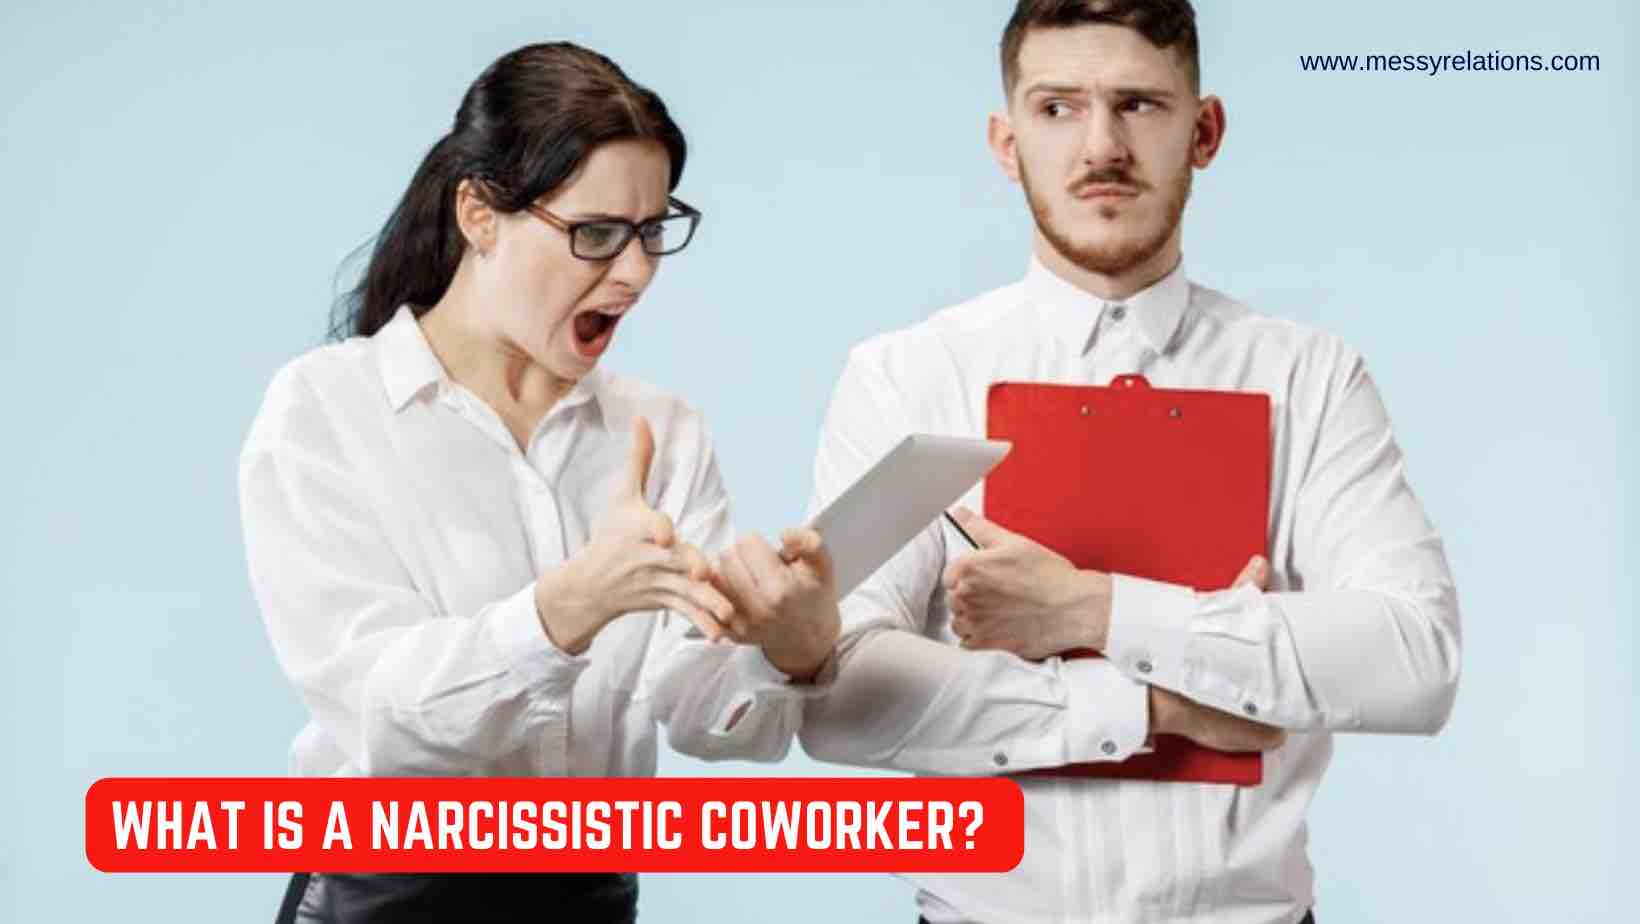 What is a Narcissistic Coworker